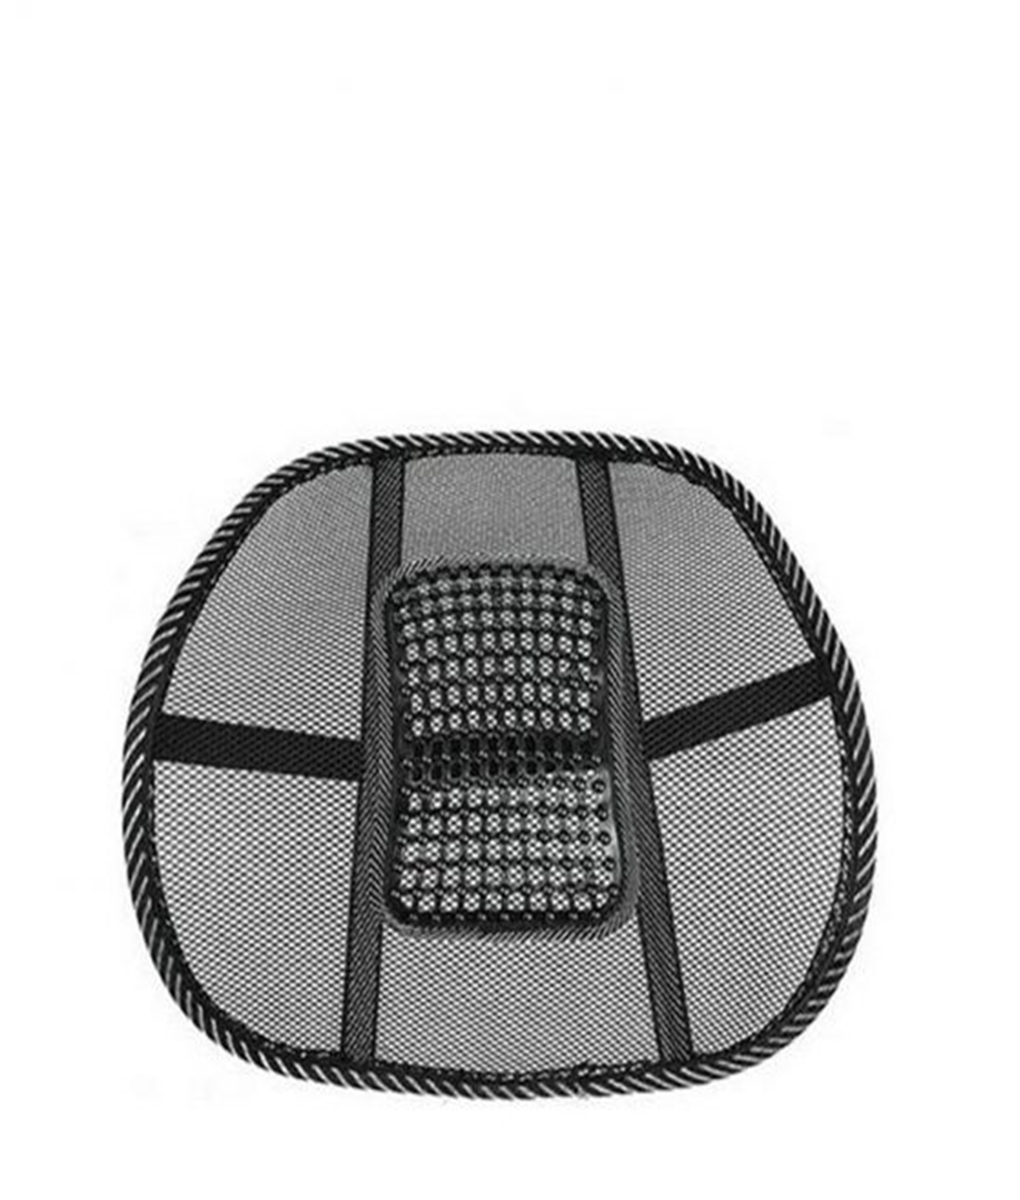 Cool Vent Cushion Mesh Back Lumbar Support Office Home Car Seat Chair Truck  Seat 